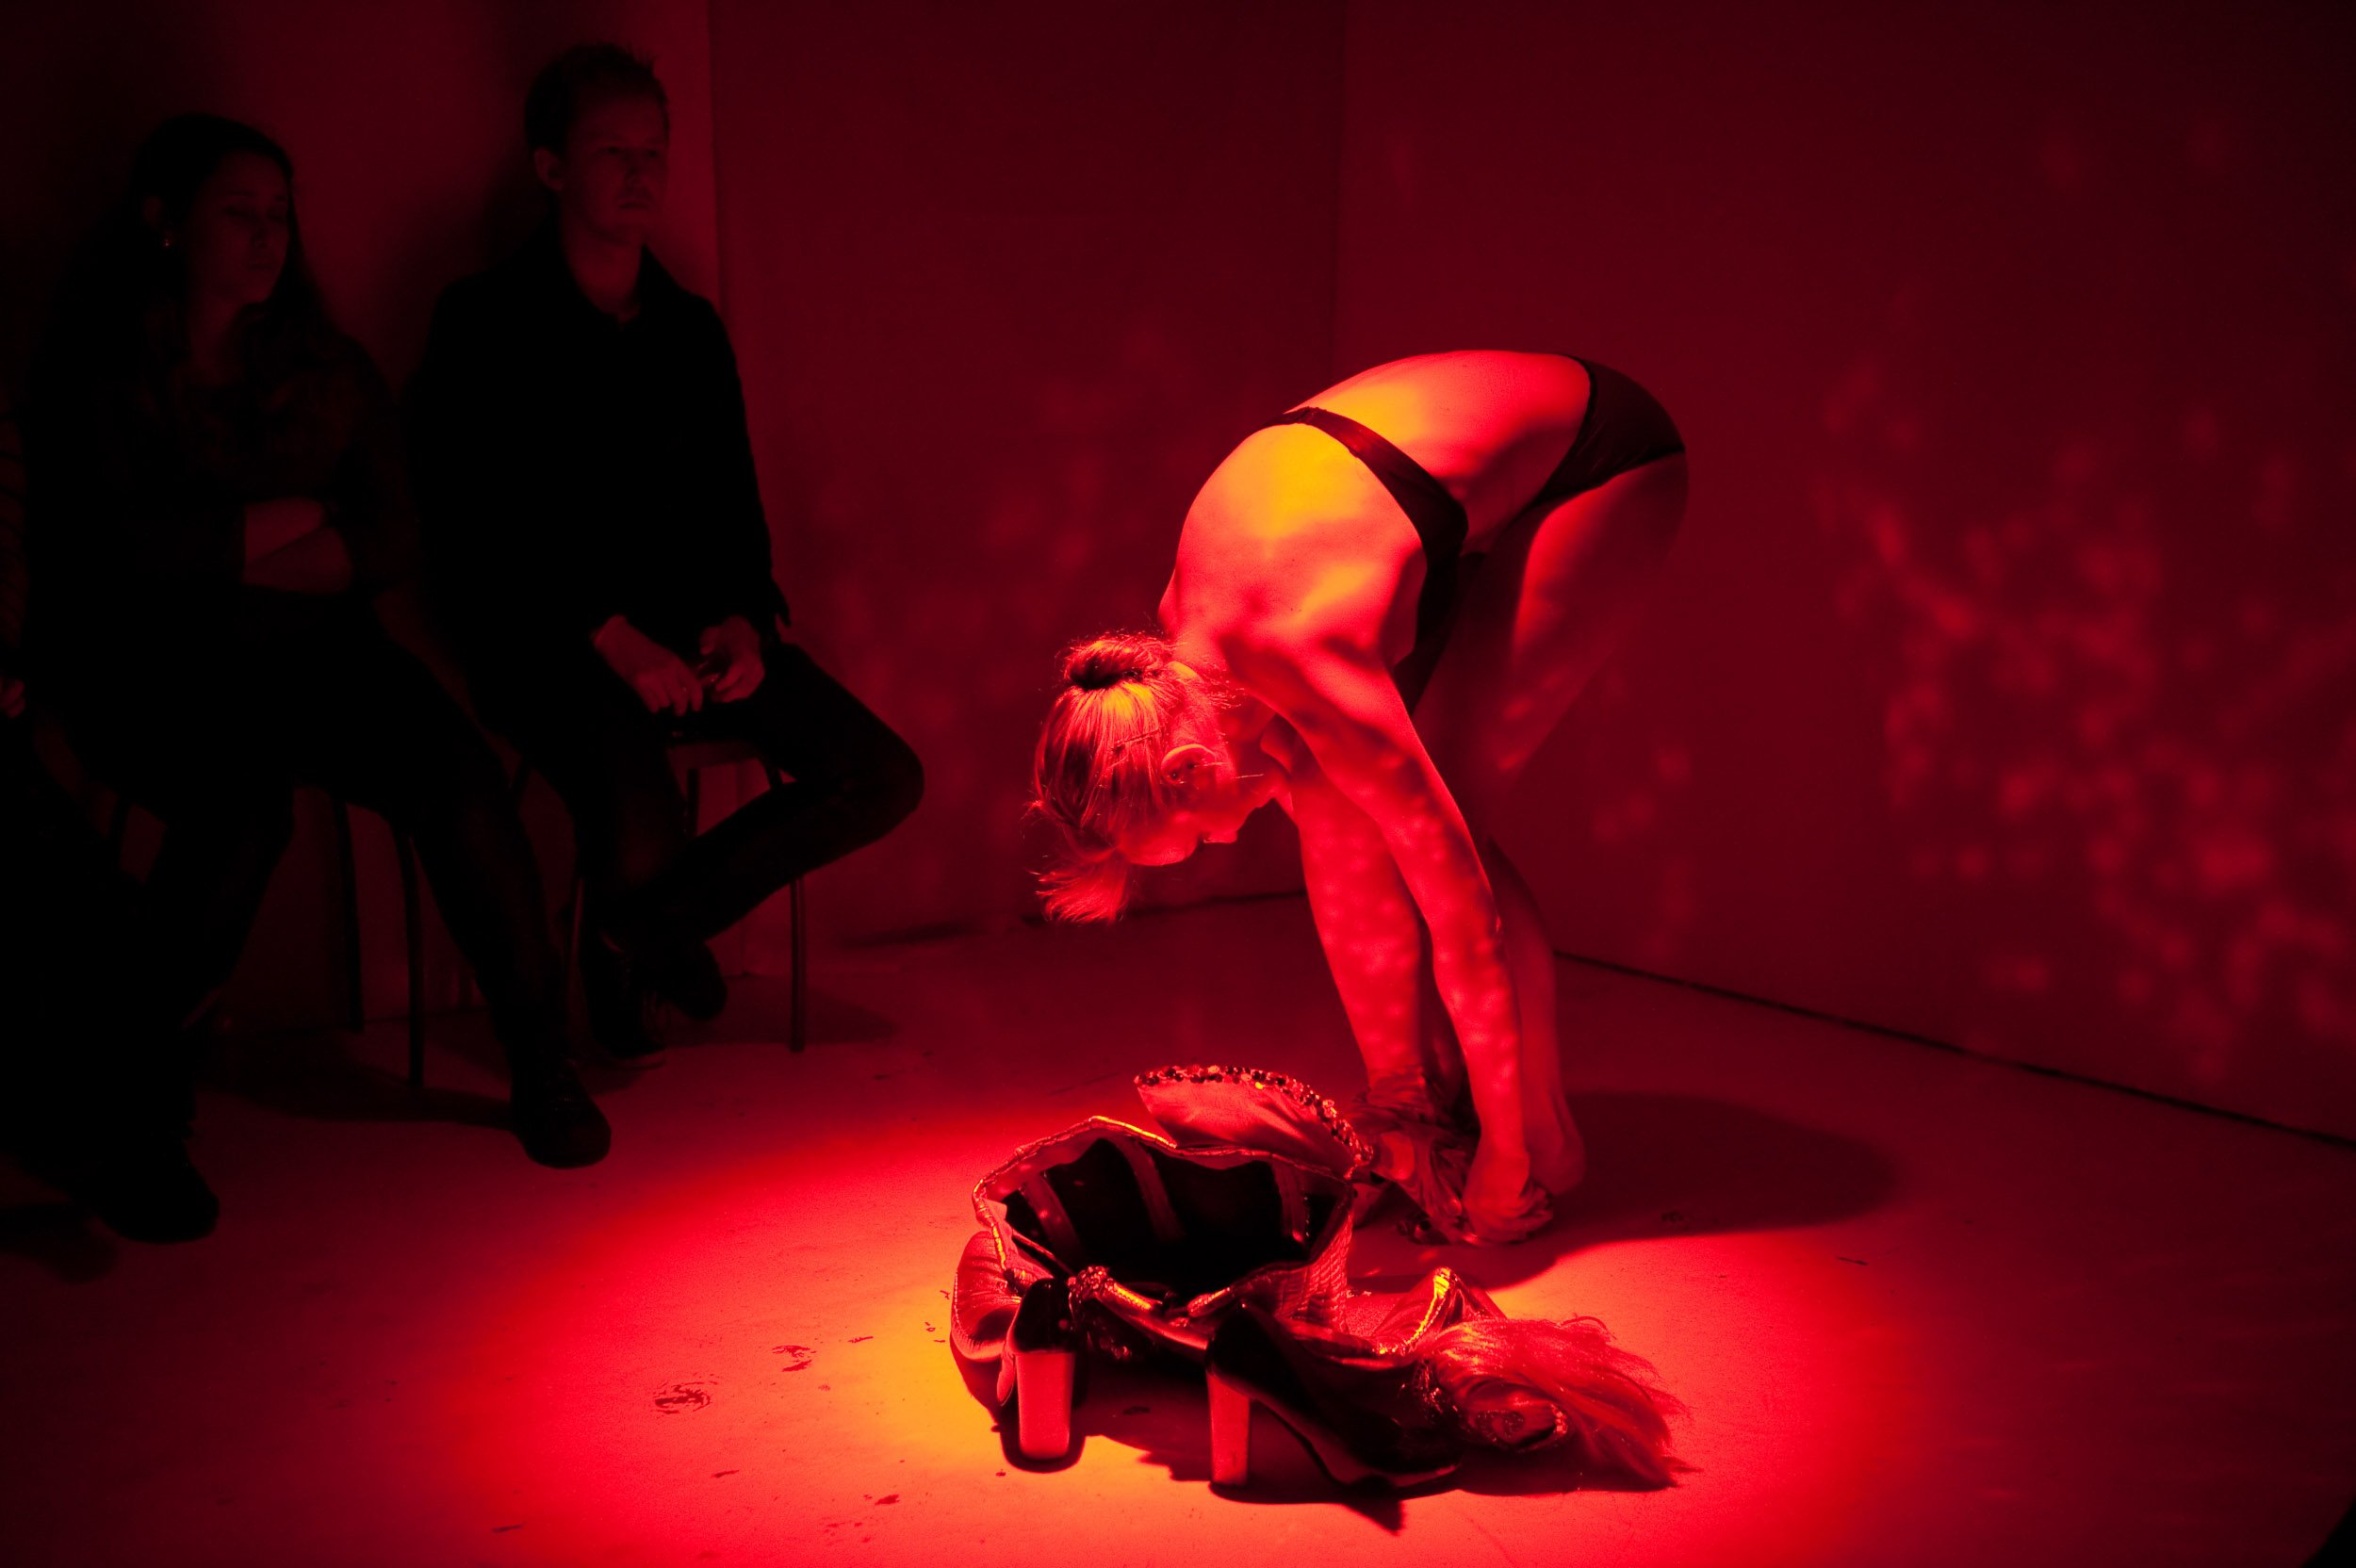  ‘Polly’s Party’, Renae Shadler and La Mama, Melbourne Fringe 2012. 